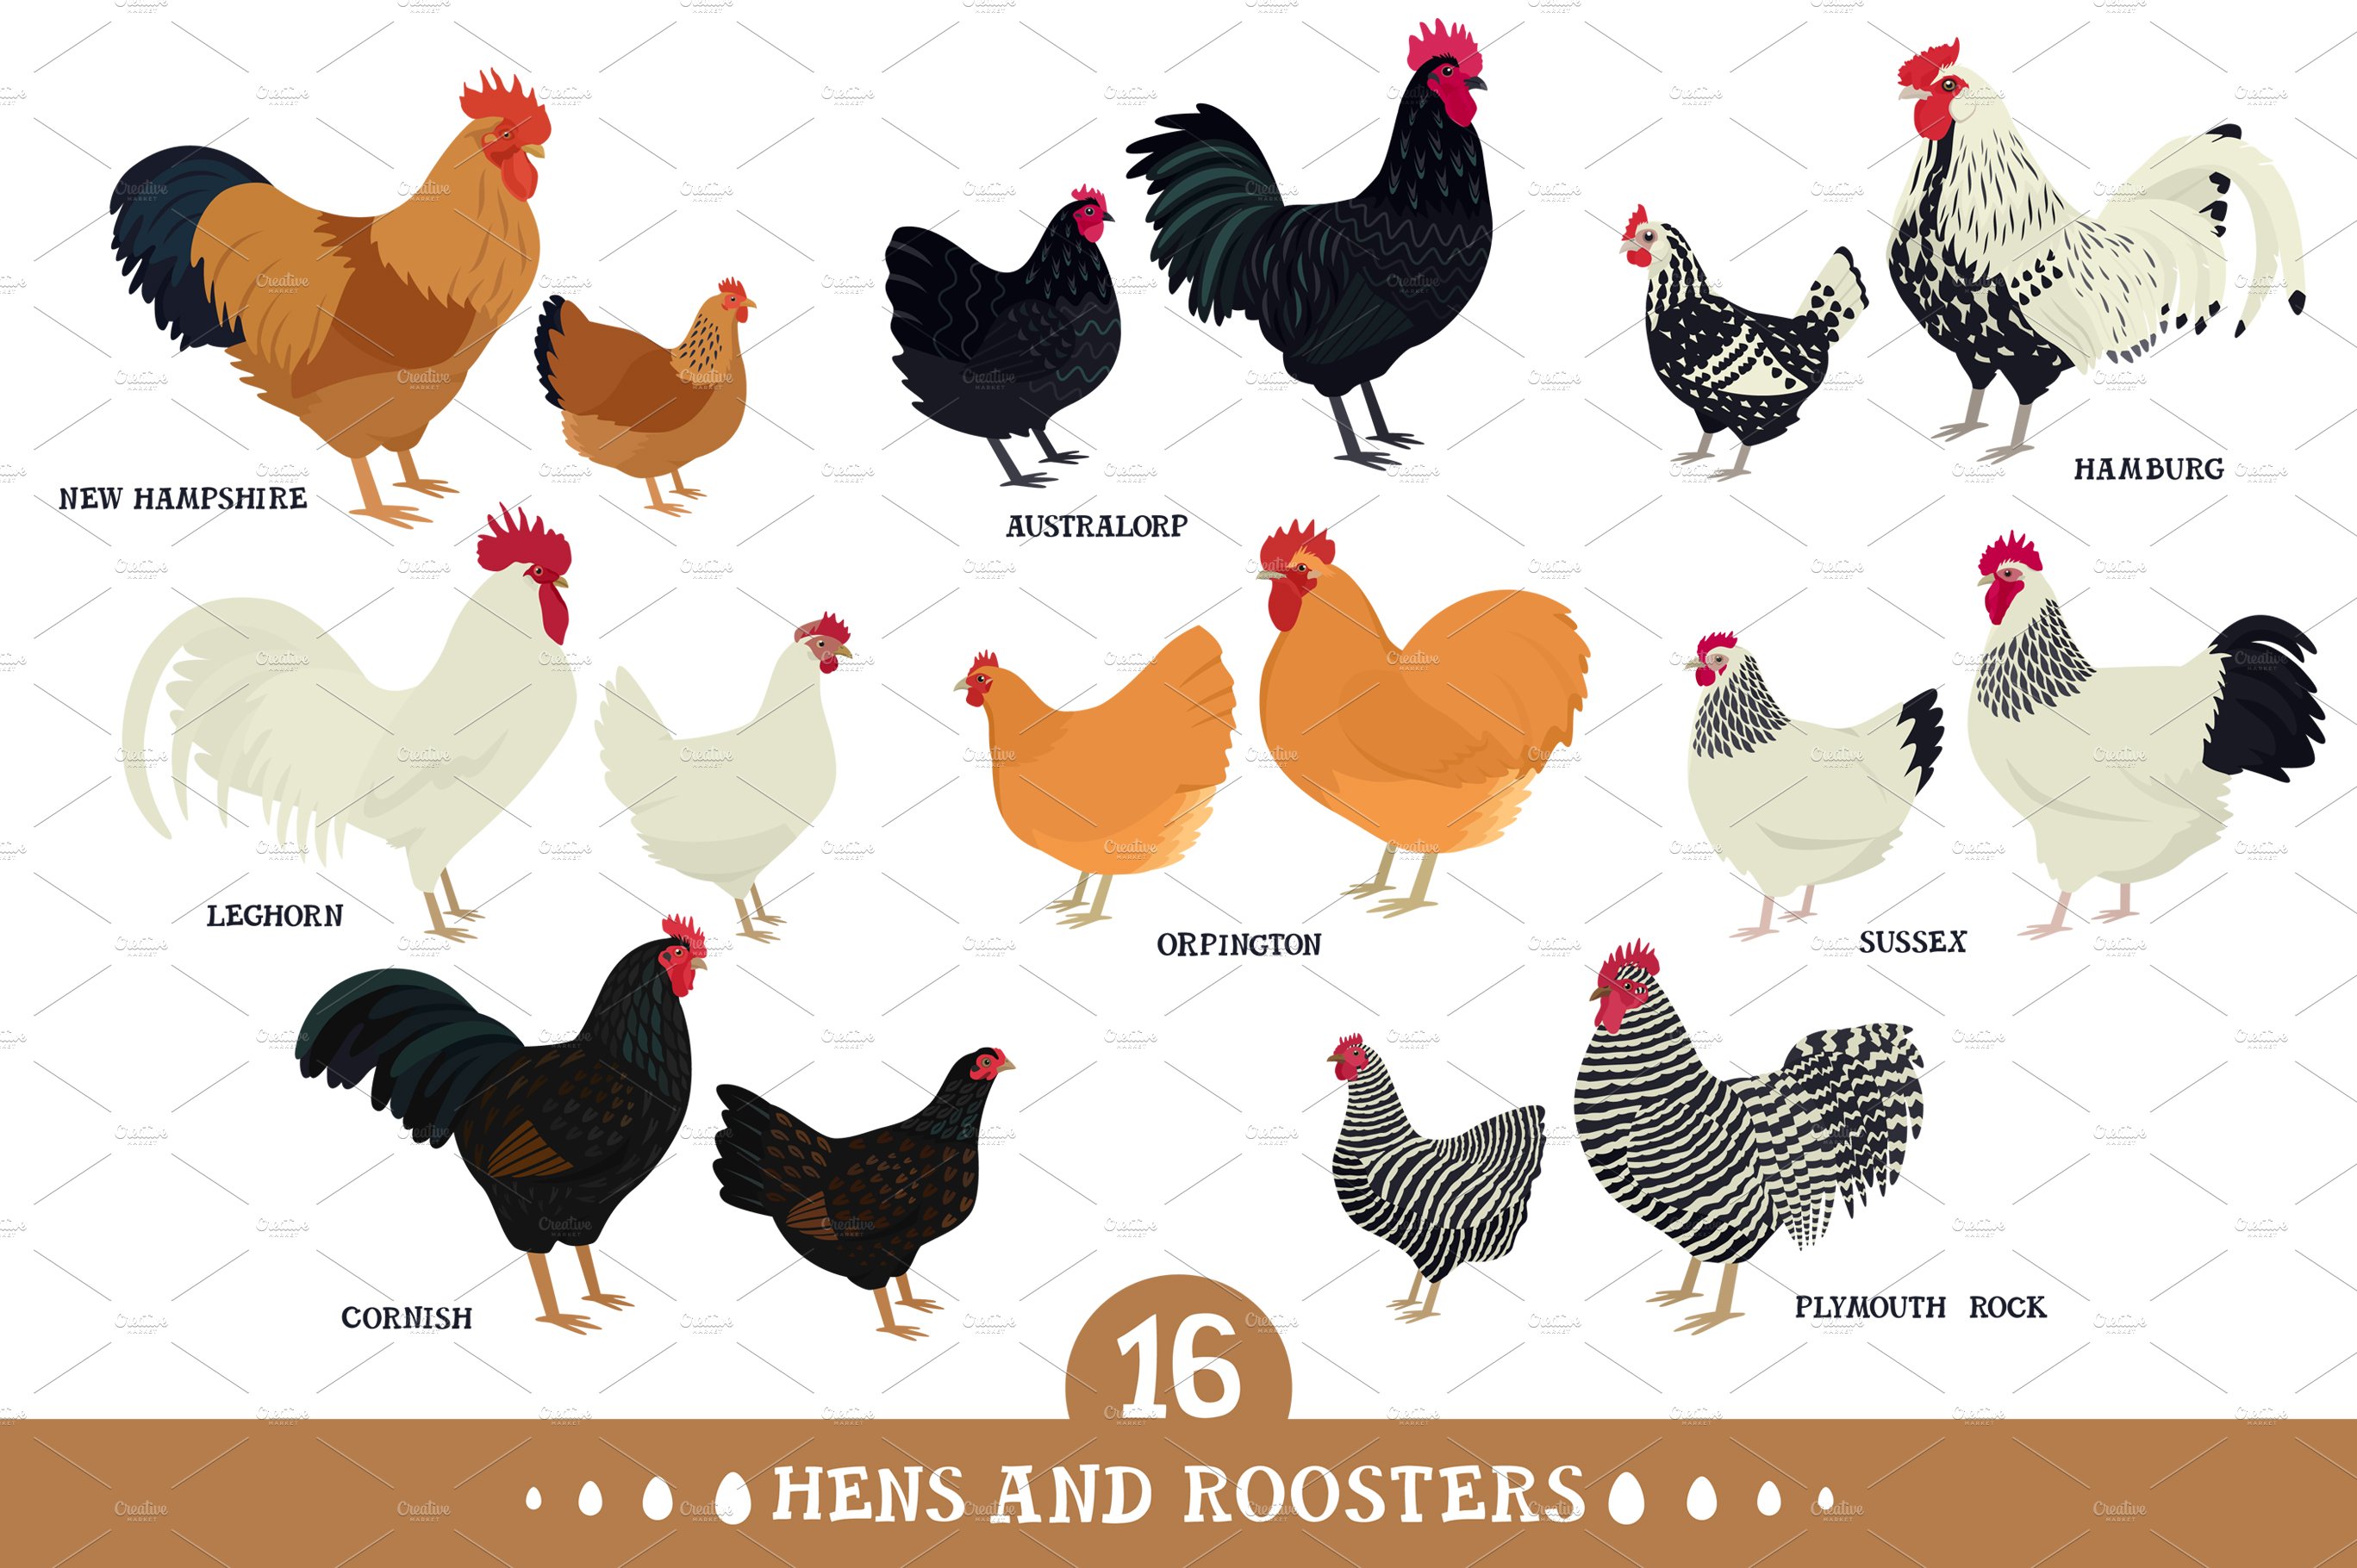 Hens and Roosters cover image.